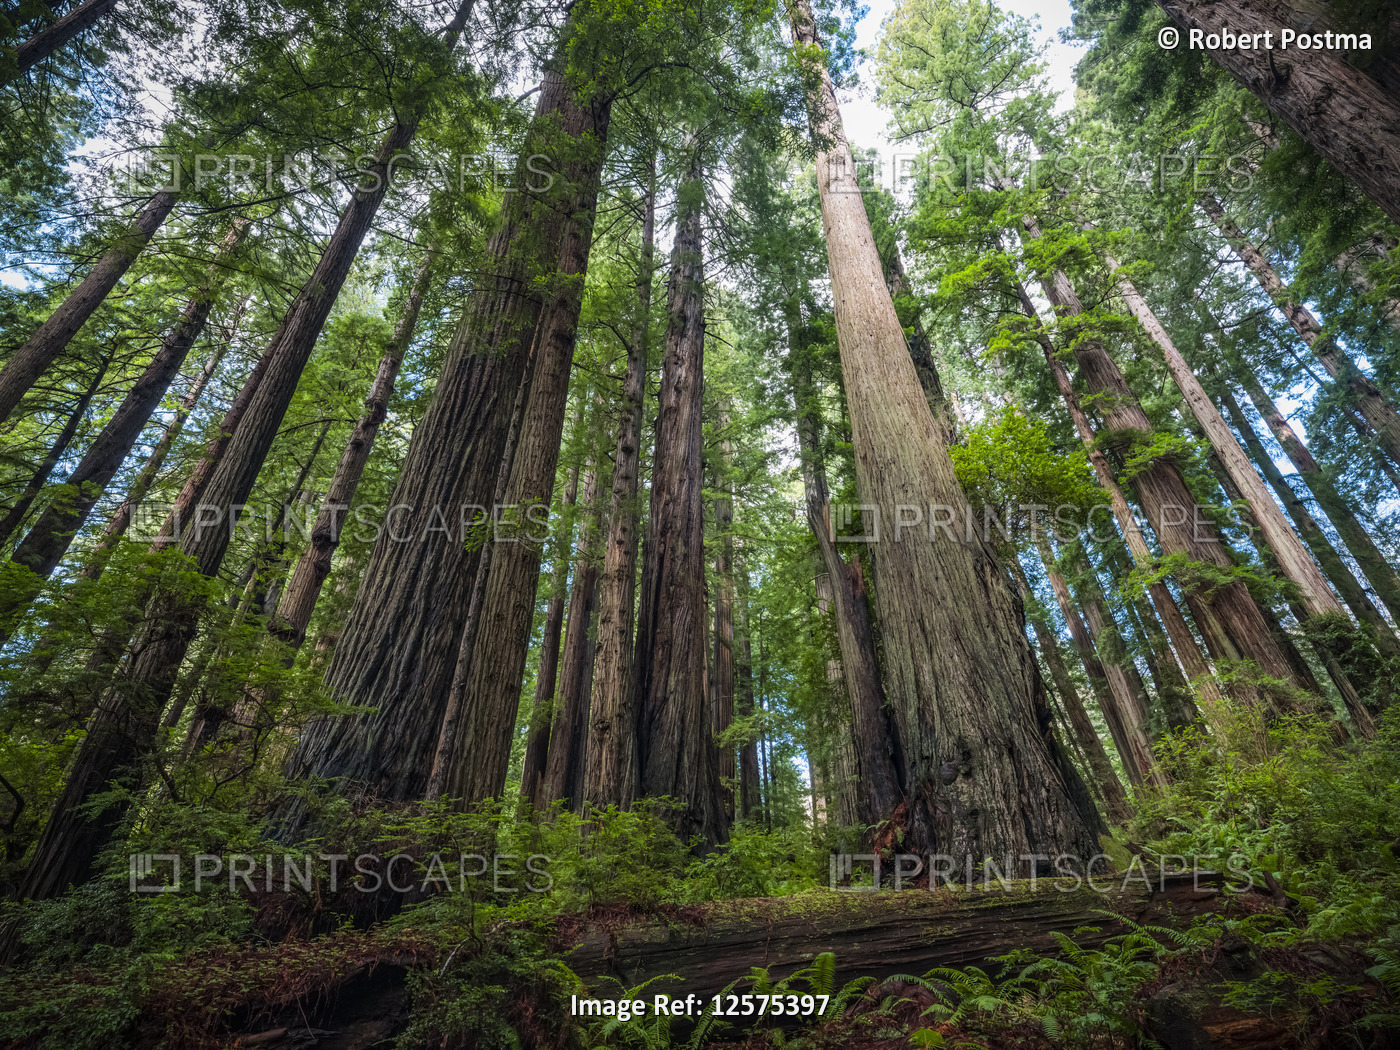 Standing in the Redwood forests of Northern California. The trees are massive ...